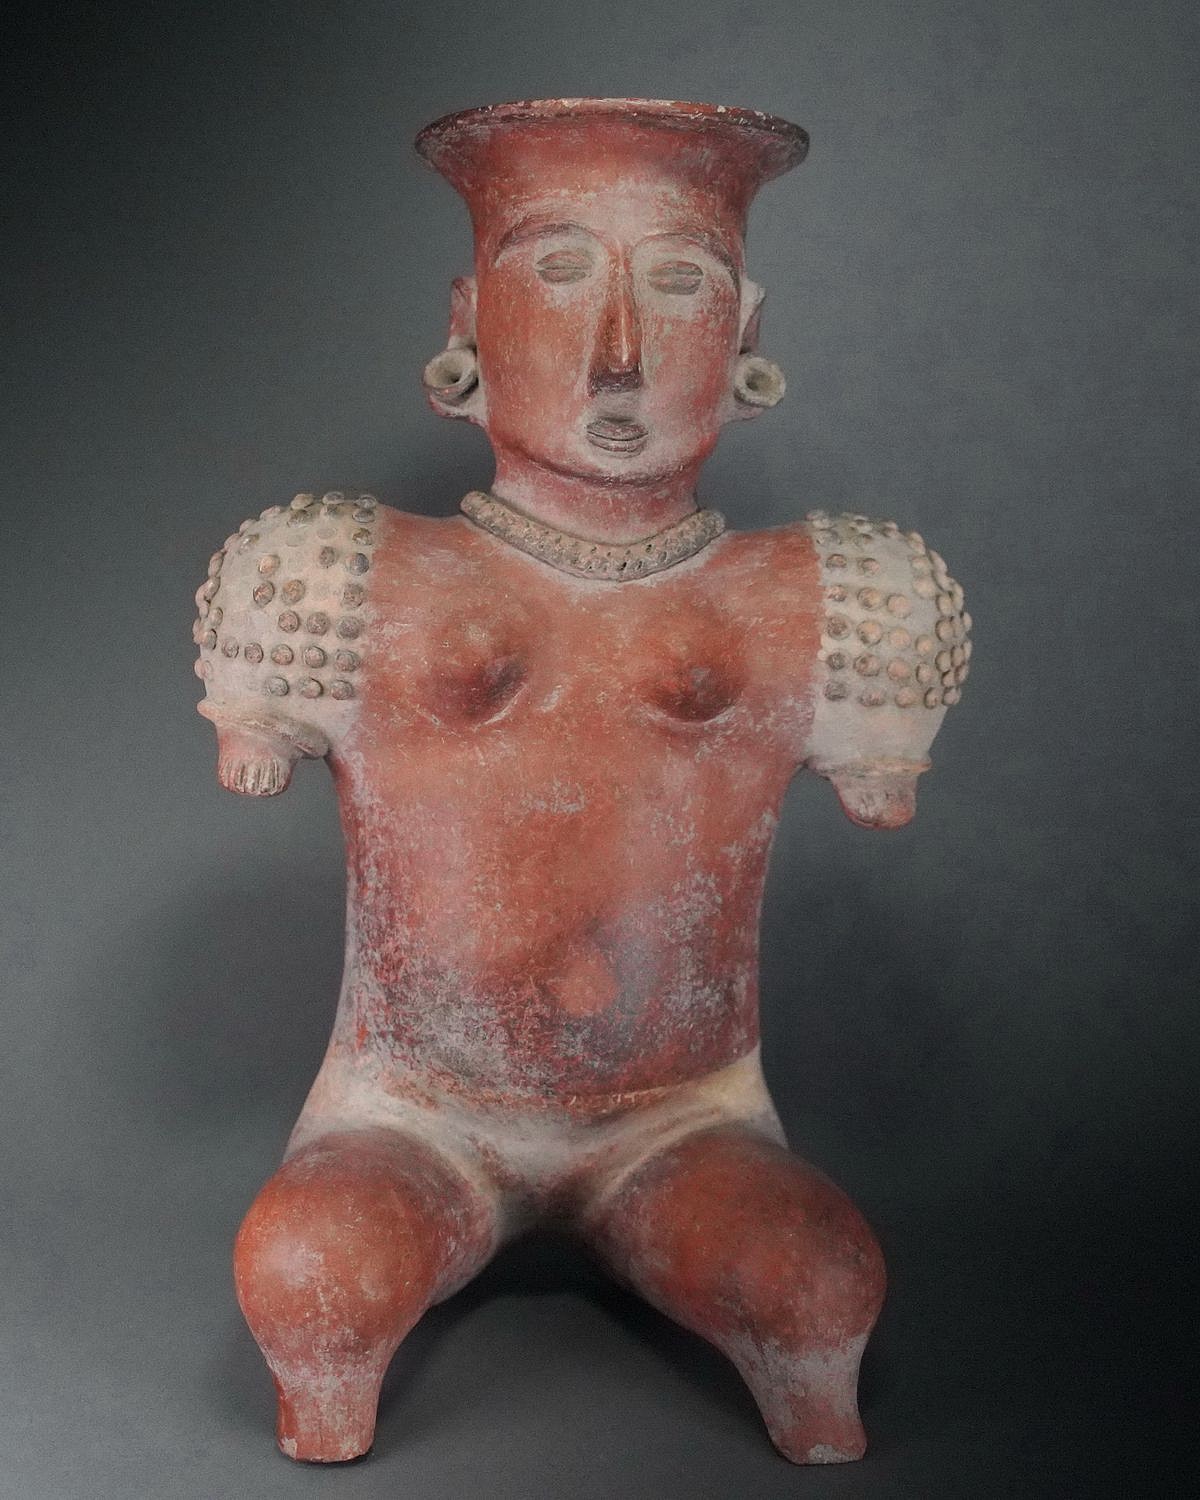 Mexico, Colima Seated Ceramic Sculpture of a Female
This seated female wears a necklace and earspools.  She is adorned with shoulder pellets and has short arms that end with stubs in place of hands.  The pellets may represent armor intended as protection for a person with short arms.  Female figures in Pre-Columbia may have been linked to concepts of the earth and fertility and are thought to represent initiated women ready for marriage and childbirth.  Usually, these figures appear to be disengaged from daily life.  Similar style Coahuanyana Valley figures are in the collection of the Fowler Museum at UCLA, and The Arizona State Museum of Natural History.  Ex-collection Hiroshi Miura, Tokyo, Japan acquired prior to 1970's.
Media: Ceramic
Dimensions: Height: 15.5"(38cm) x Width: 10"(22cm)
$5,400
p1055